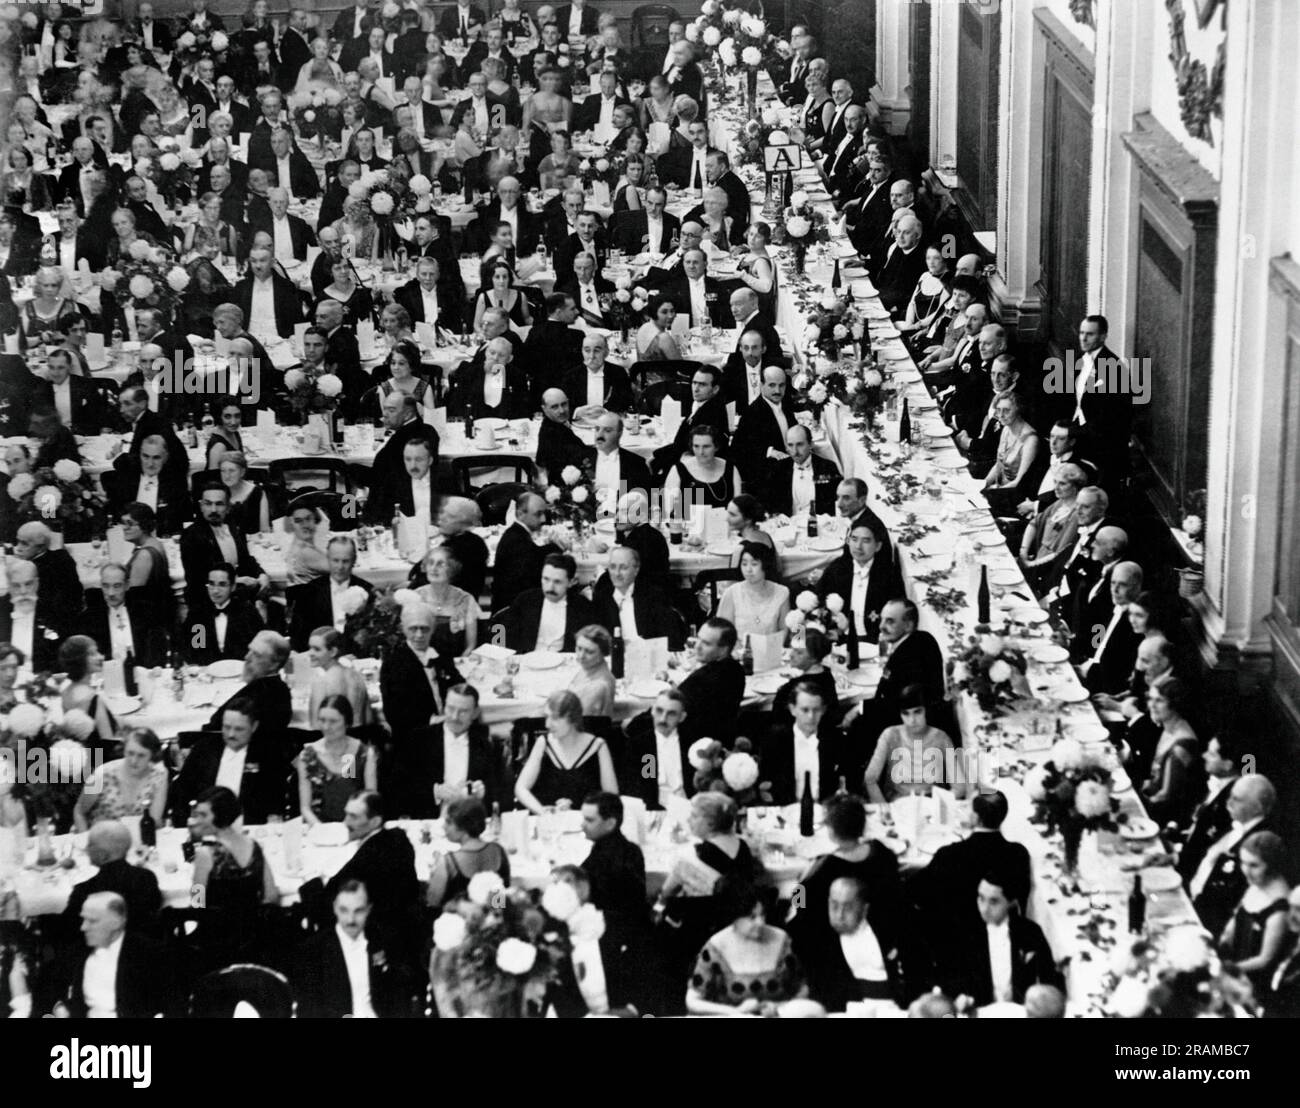 London, England:  1930 The Royal Geographical Society celebrates its 100th anniversary with a spectacular dinner attended by the Prince of Wales. He is directly on front of the man standing on the right. Stock Photo